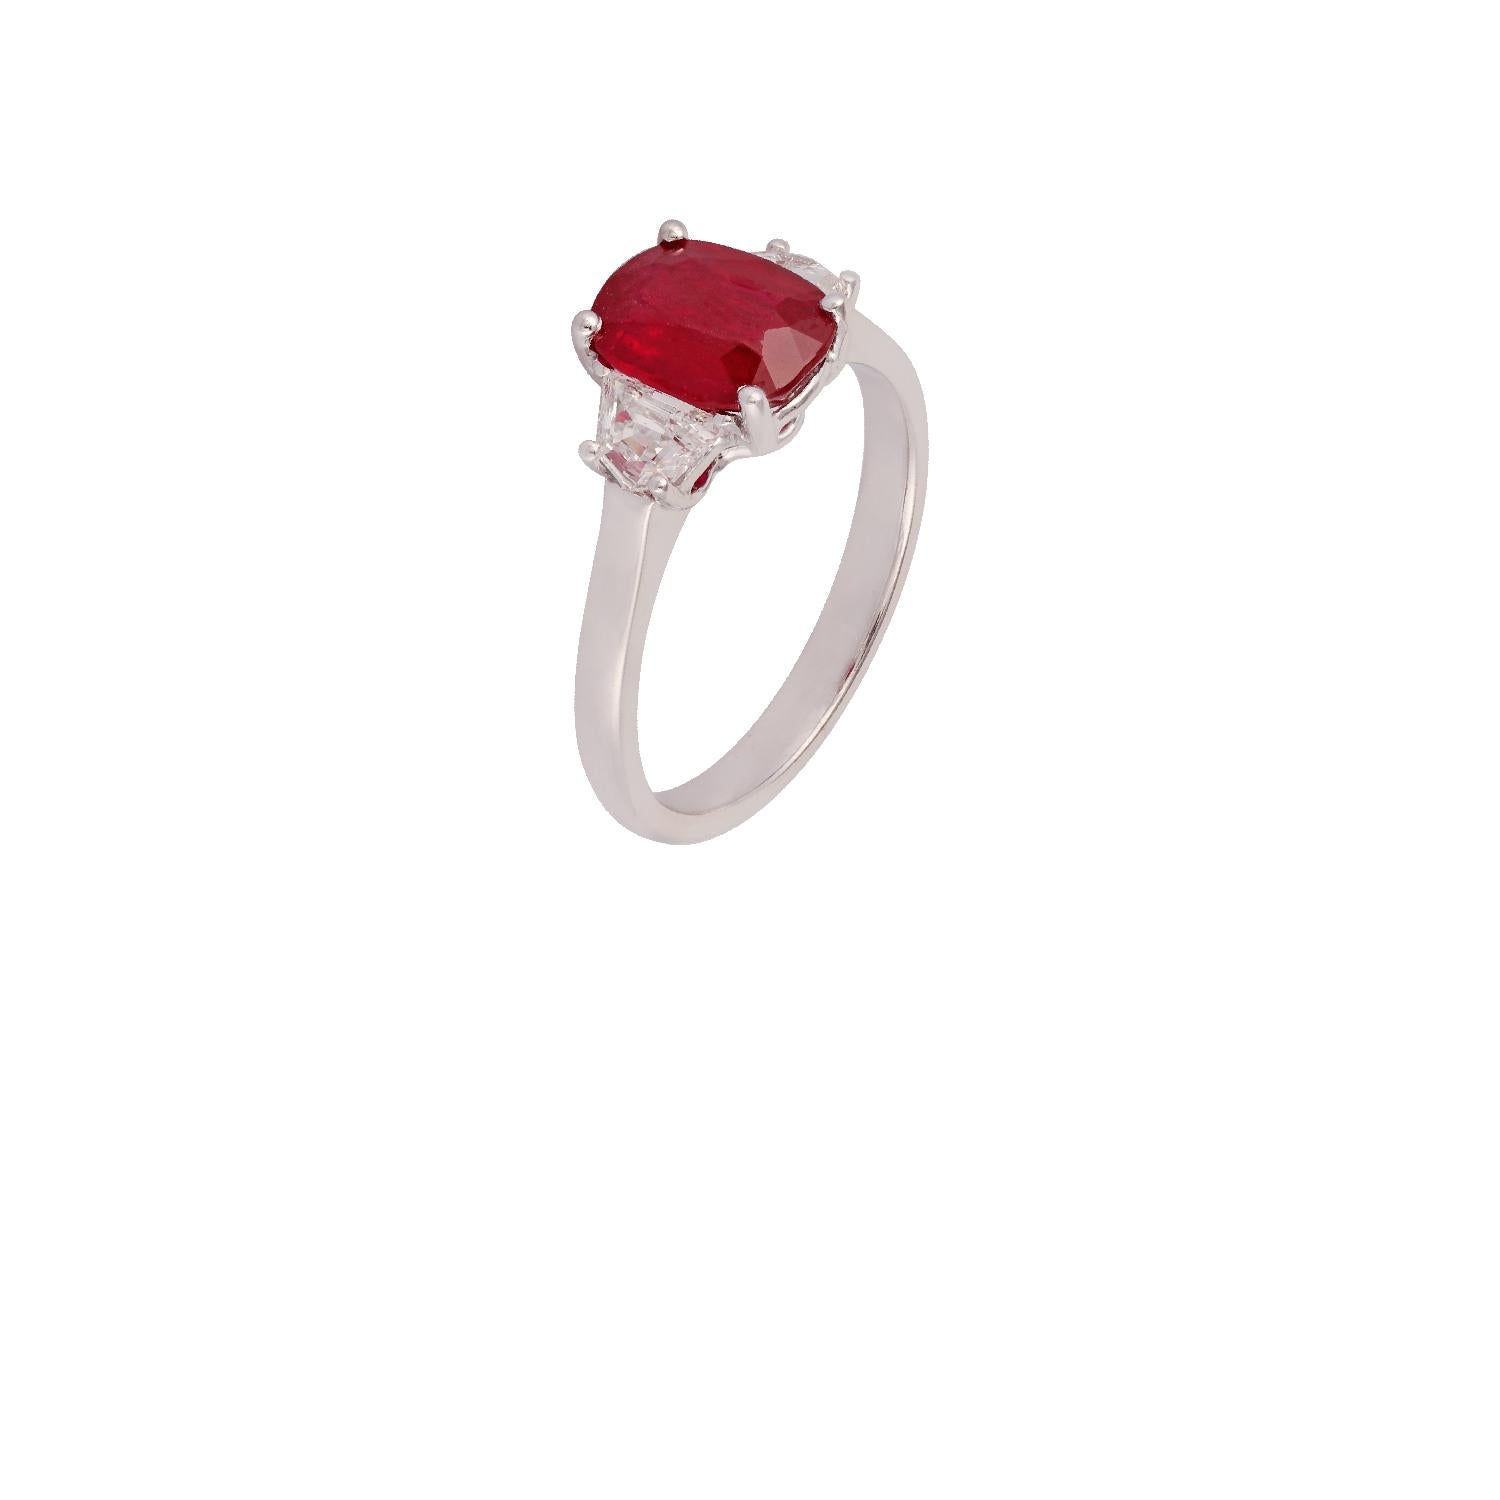 Contemporary 2.21 Carat Mozambique Ruby and Diamond Ring Studded in 18 Karat White Gold For Sale